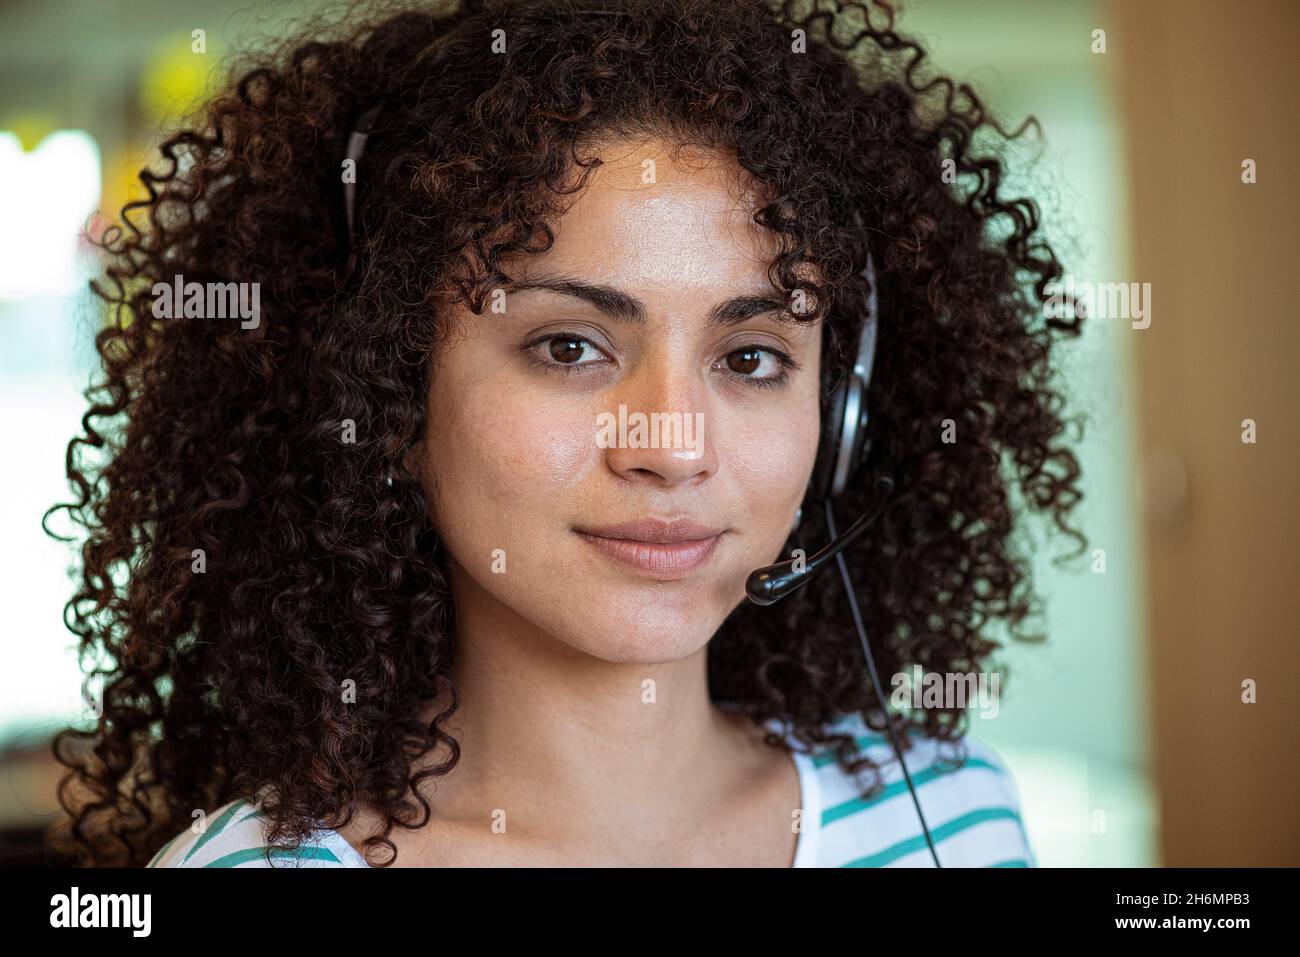 Portrait of young woman wearing headset Stock Photo